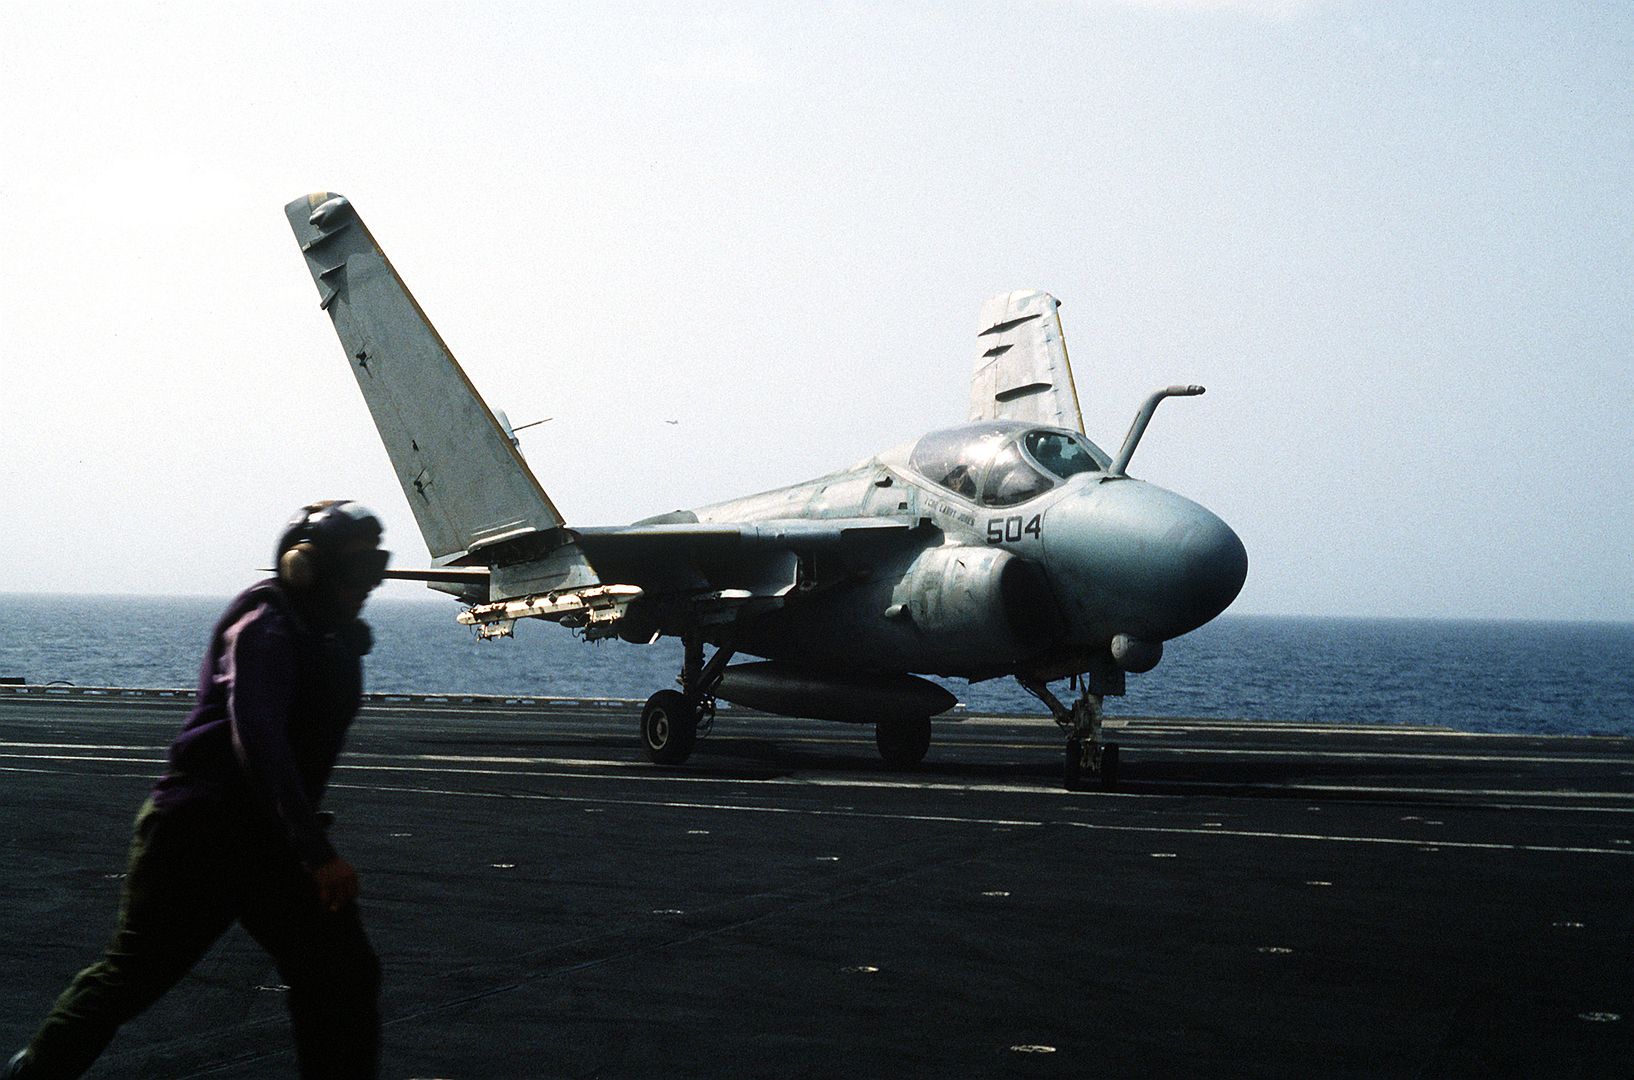 An A 6E Intruder Aircraft Taxis On The Flight Deck Of The Aircraft Carrier USS CORAL SEA Shortly After Landing